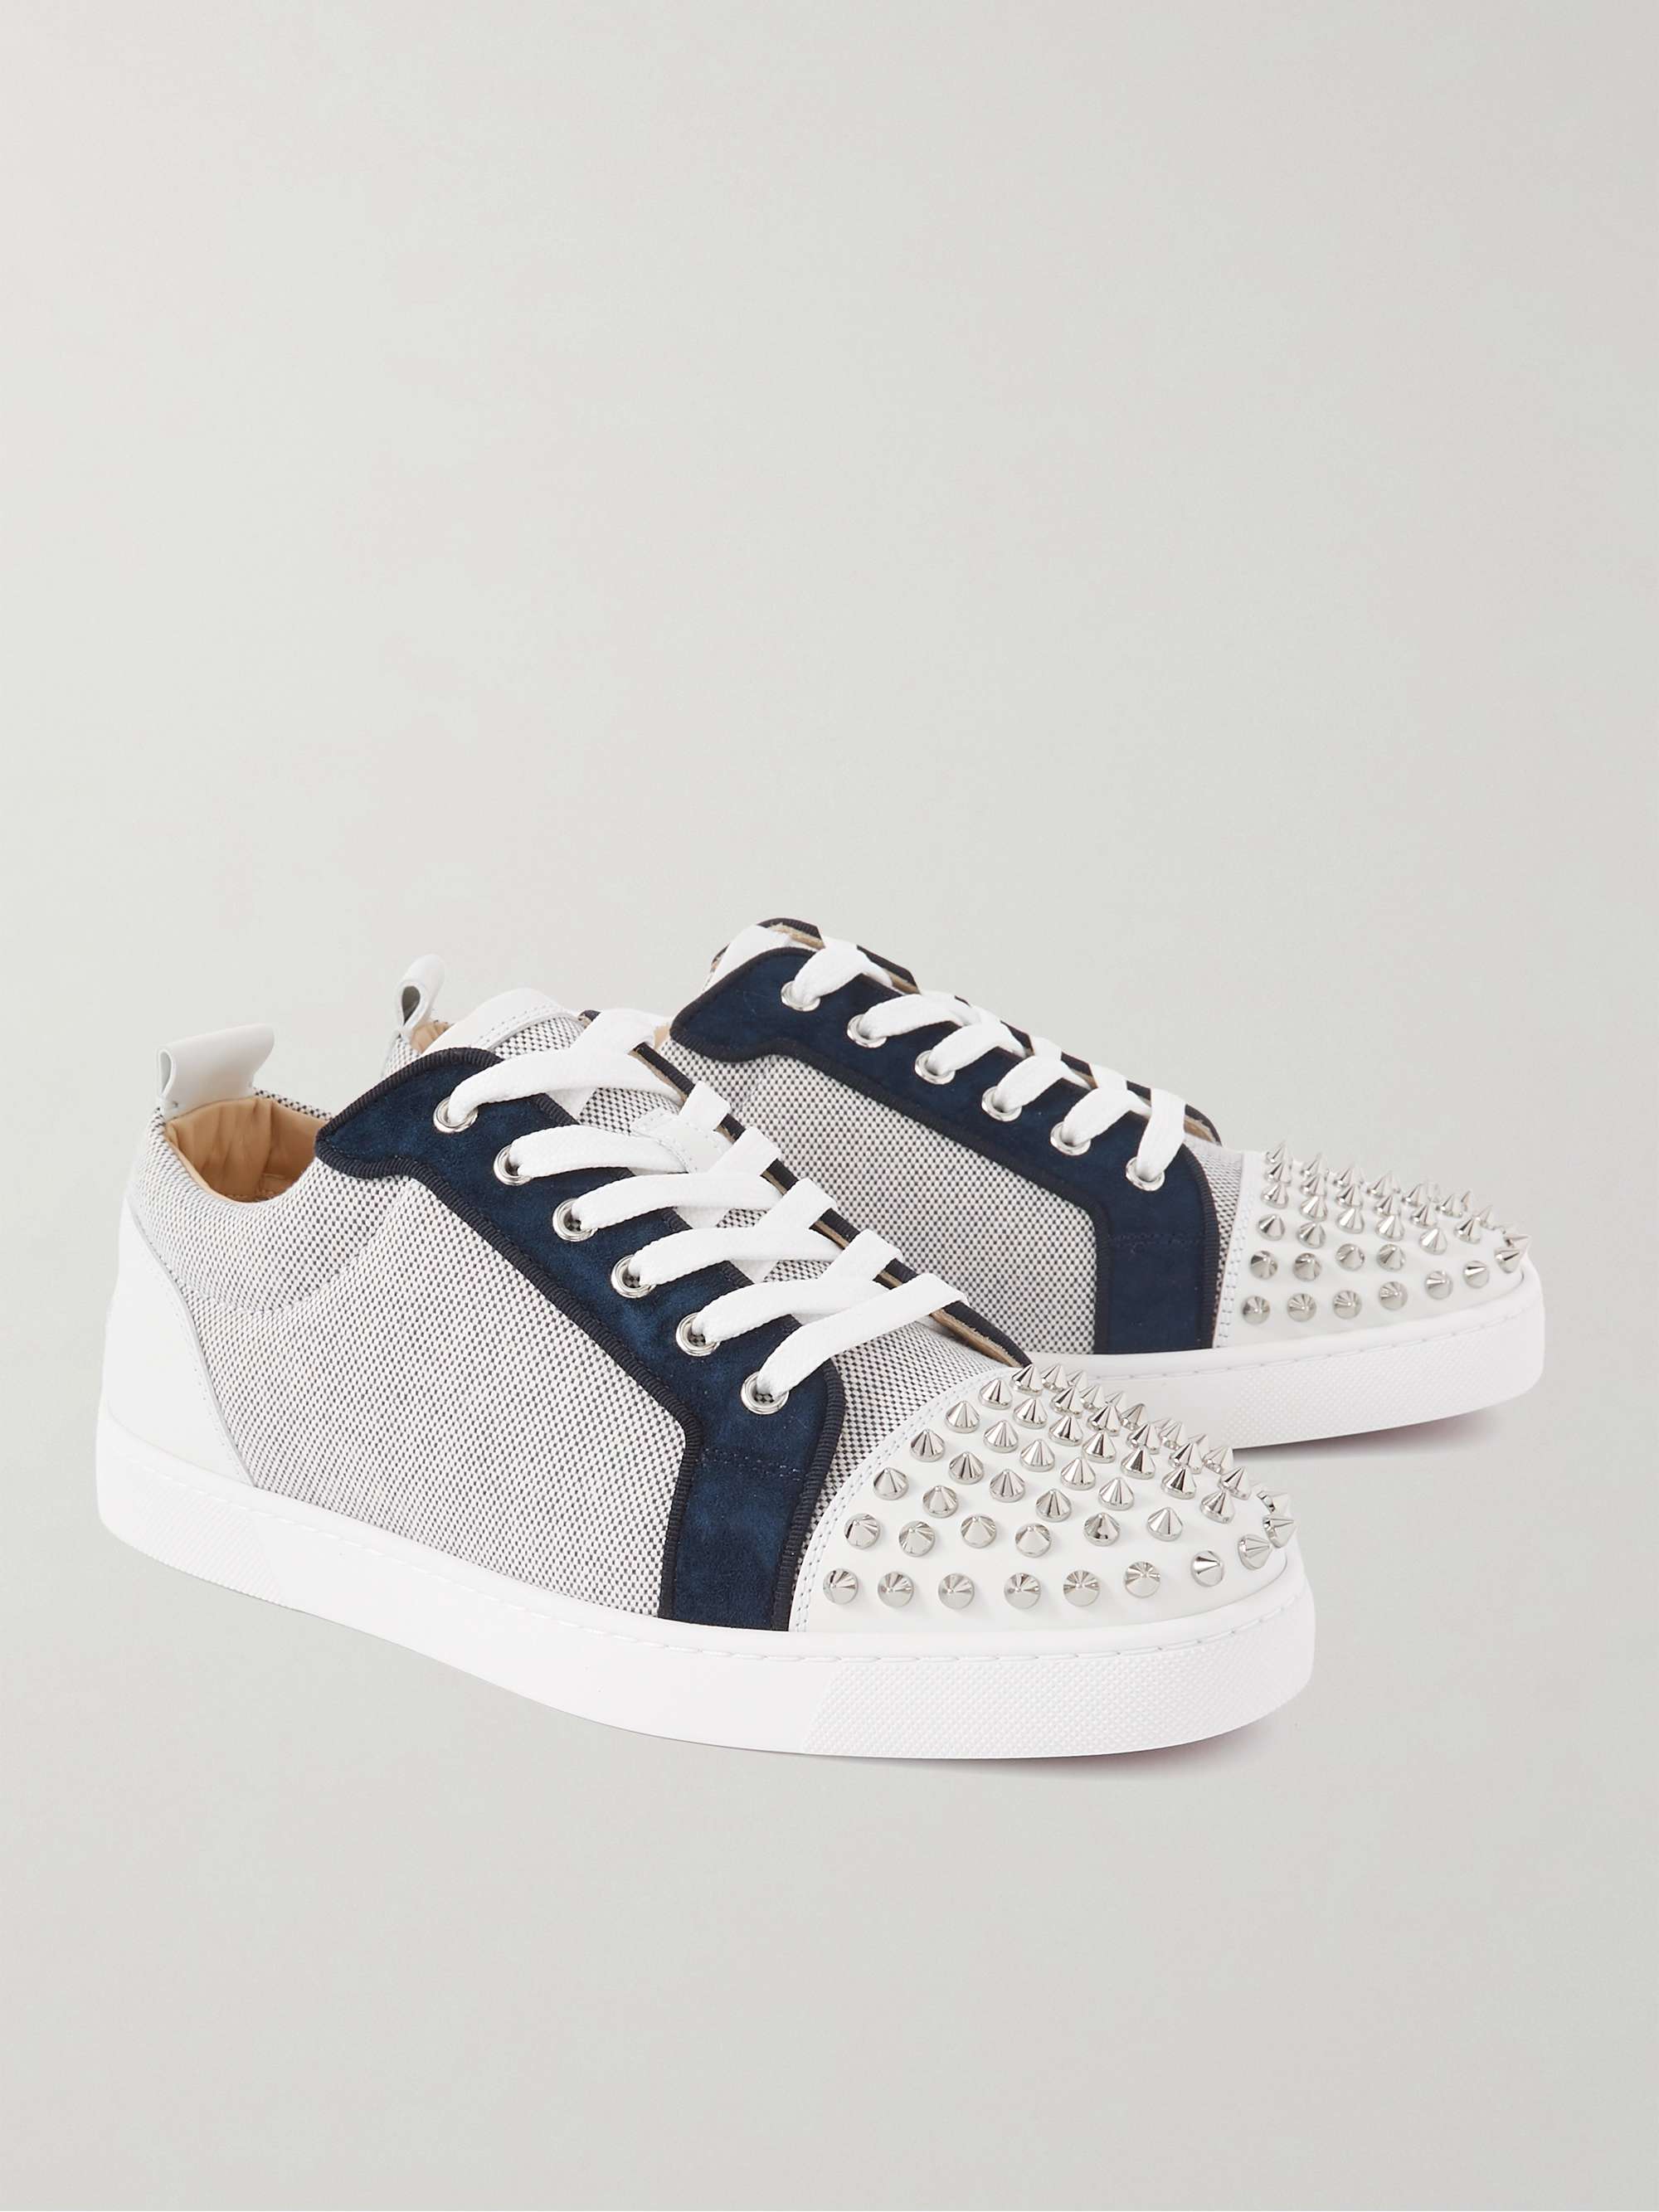 CHRISTIAN LOUBOUTIN Louis Junior Studded Leather-Trimmed Canvas Sneakers